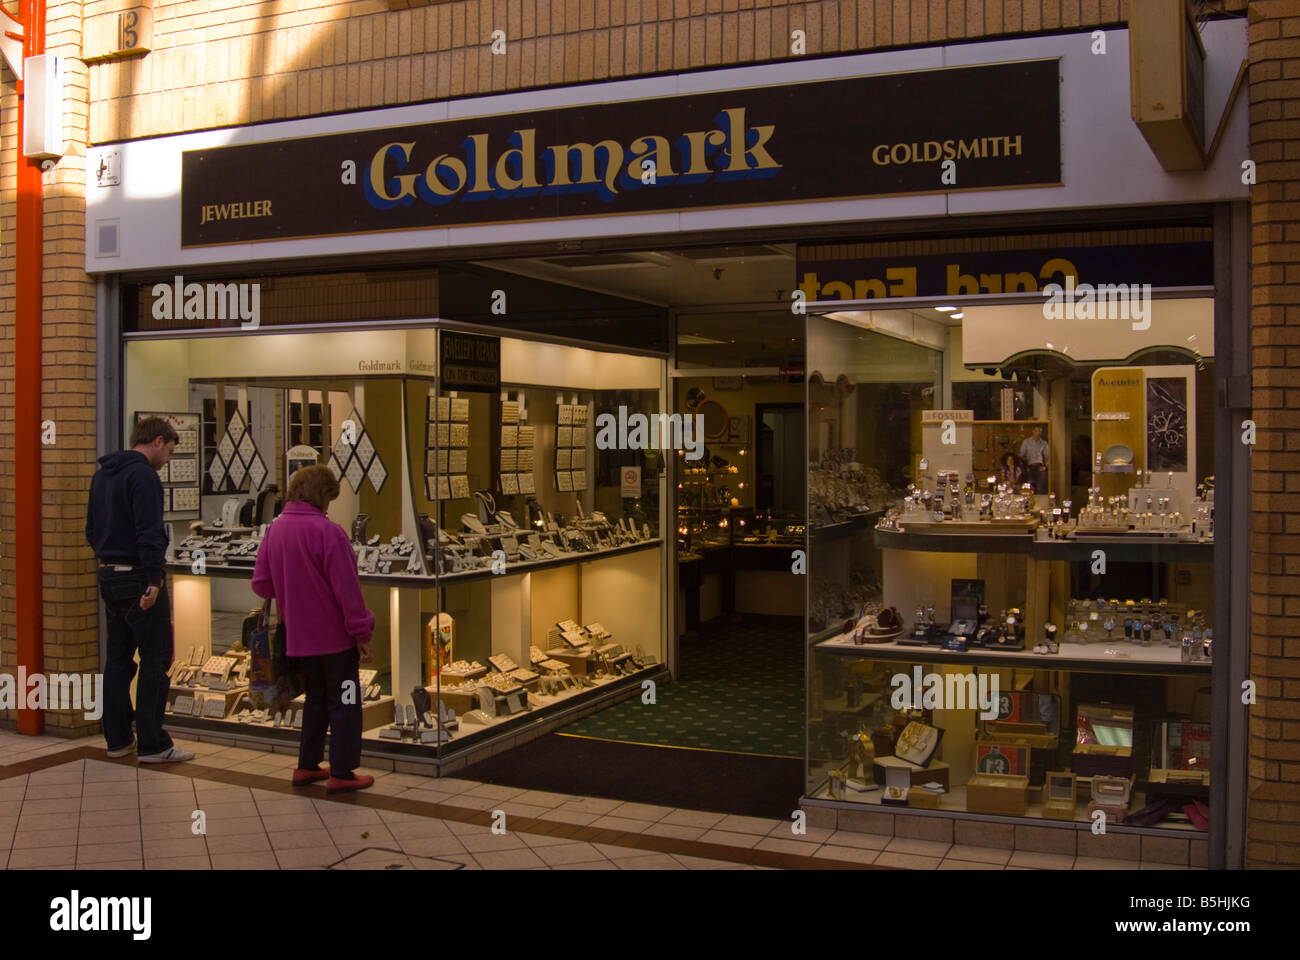 Goldmark the goldsmith and jeweller in Lowestoft Suffolk Uk selling jewellery and gold rings etc. Stock Photo